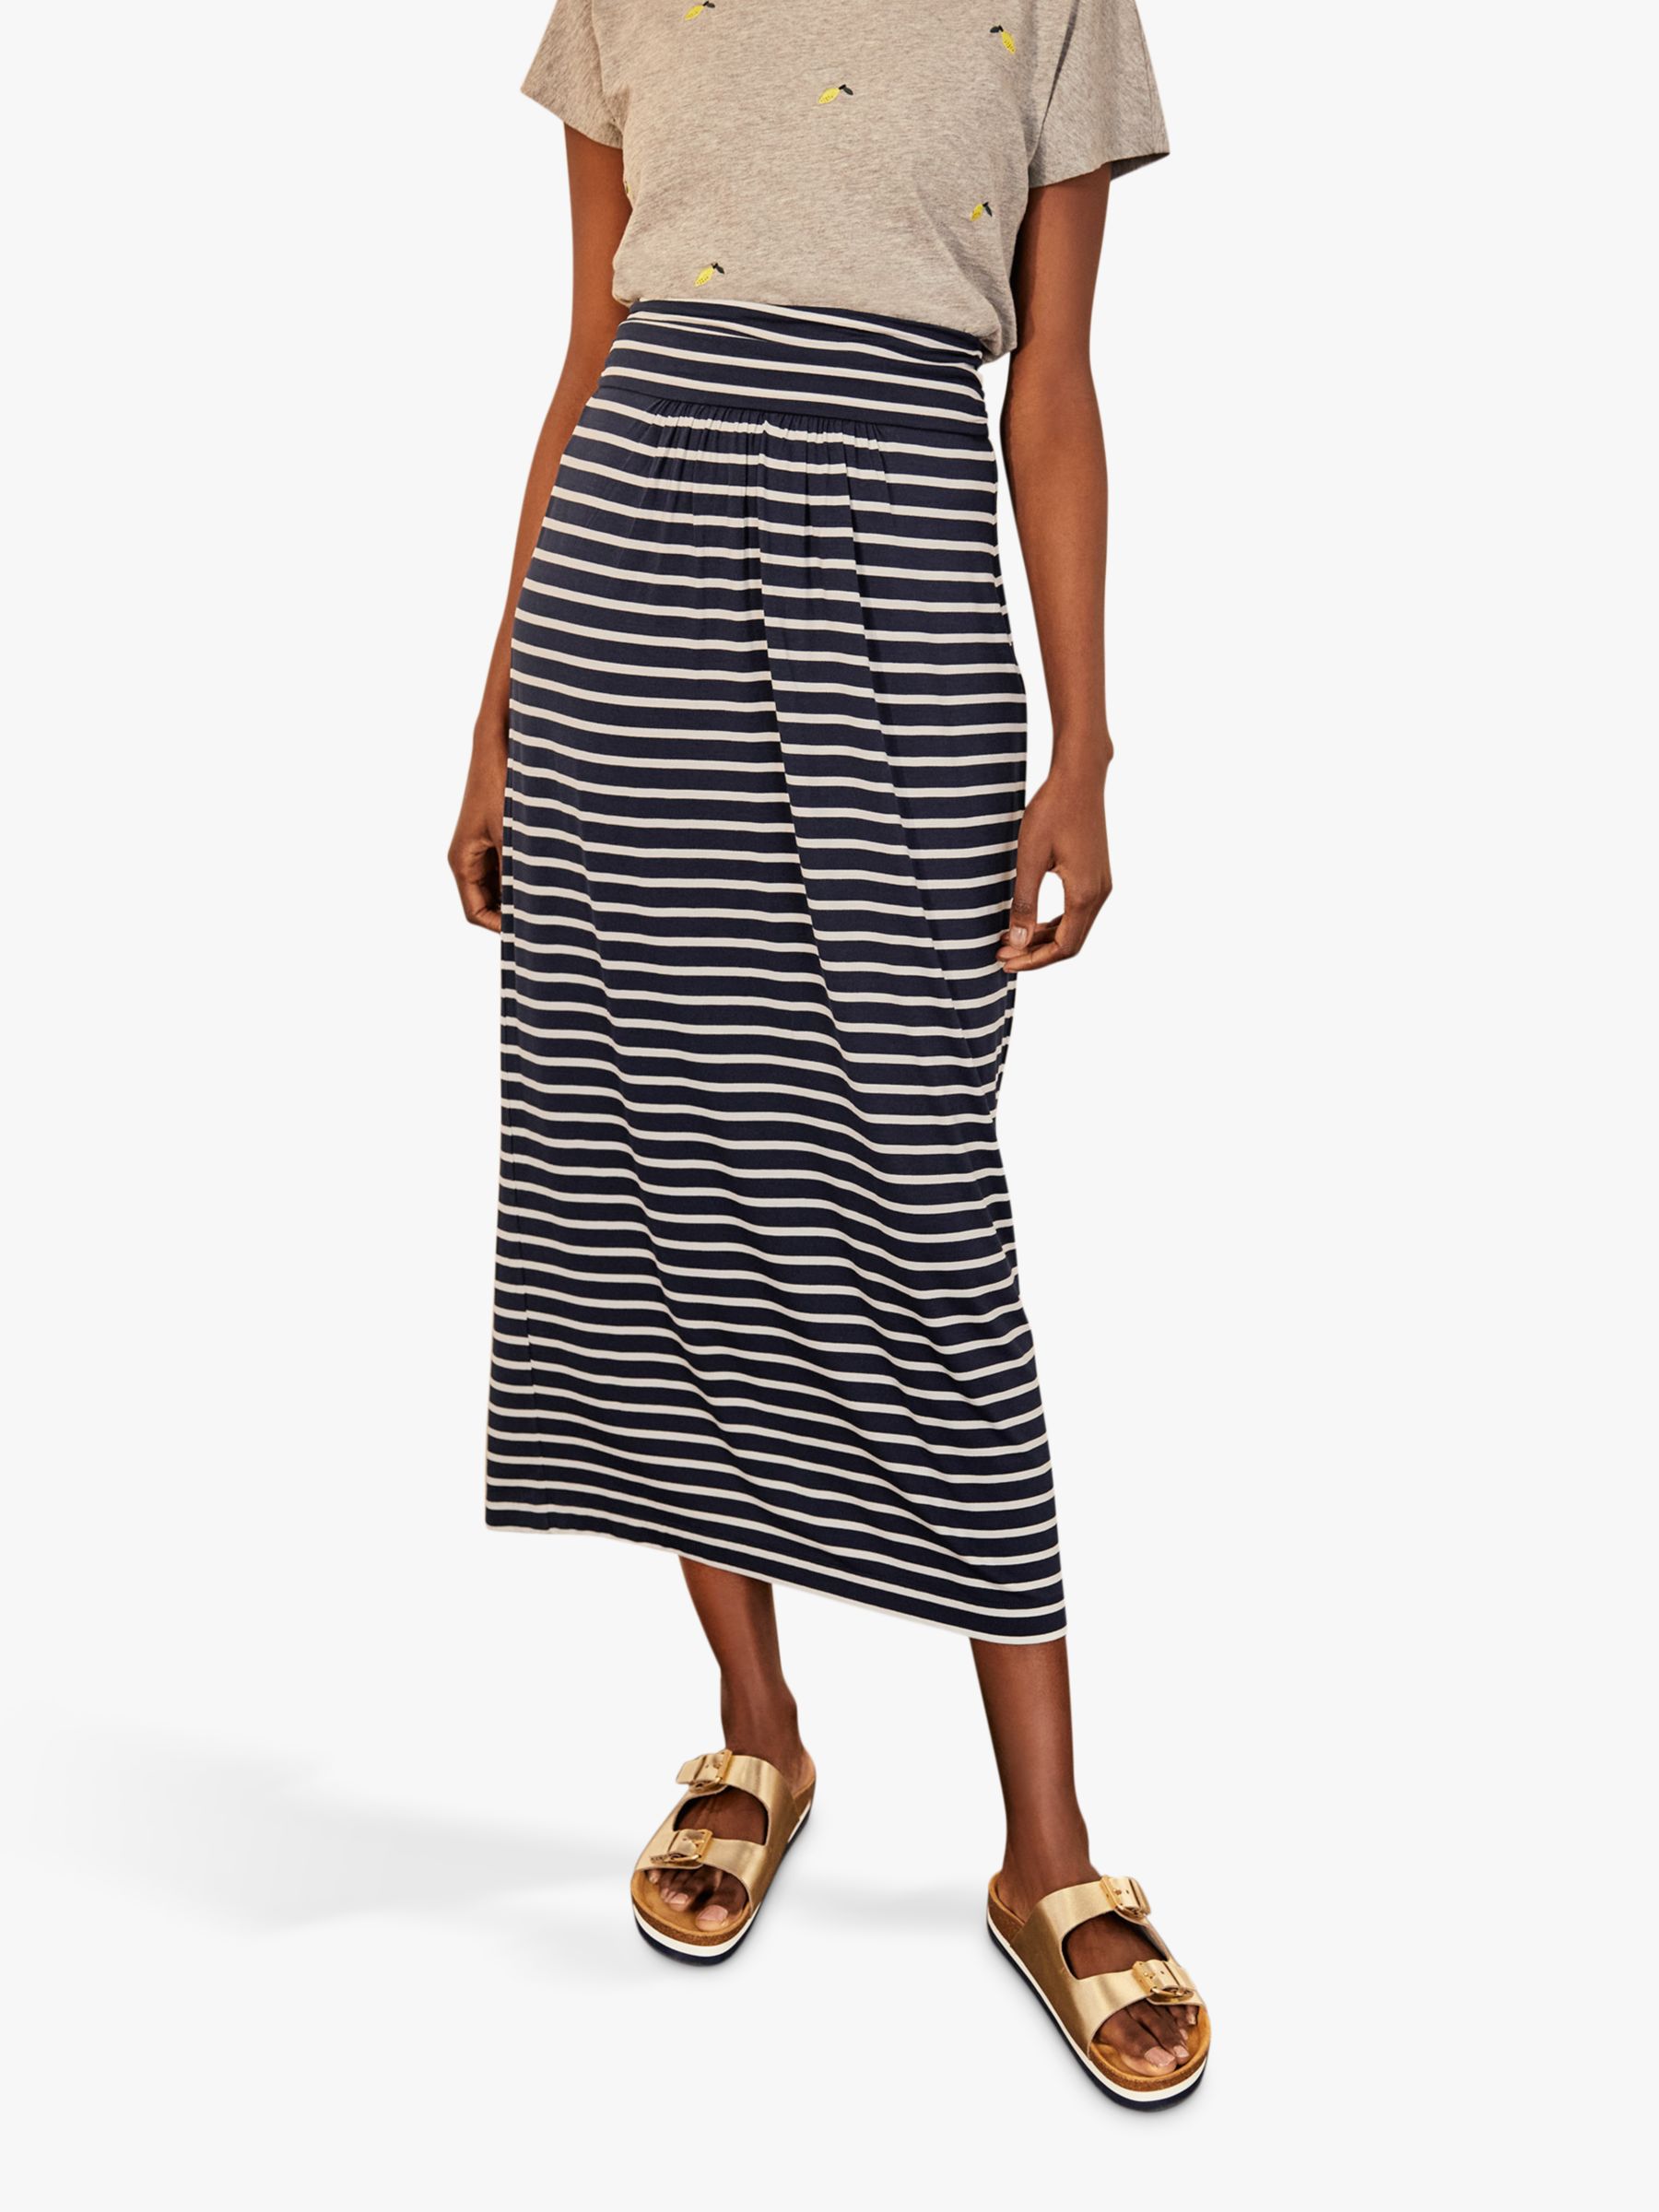 Boden Stripe Ruched Skirt, Navy/Ivory at John Lewis & Partners